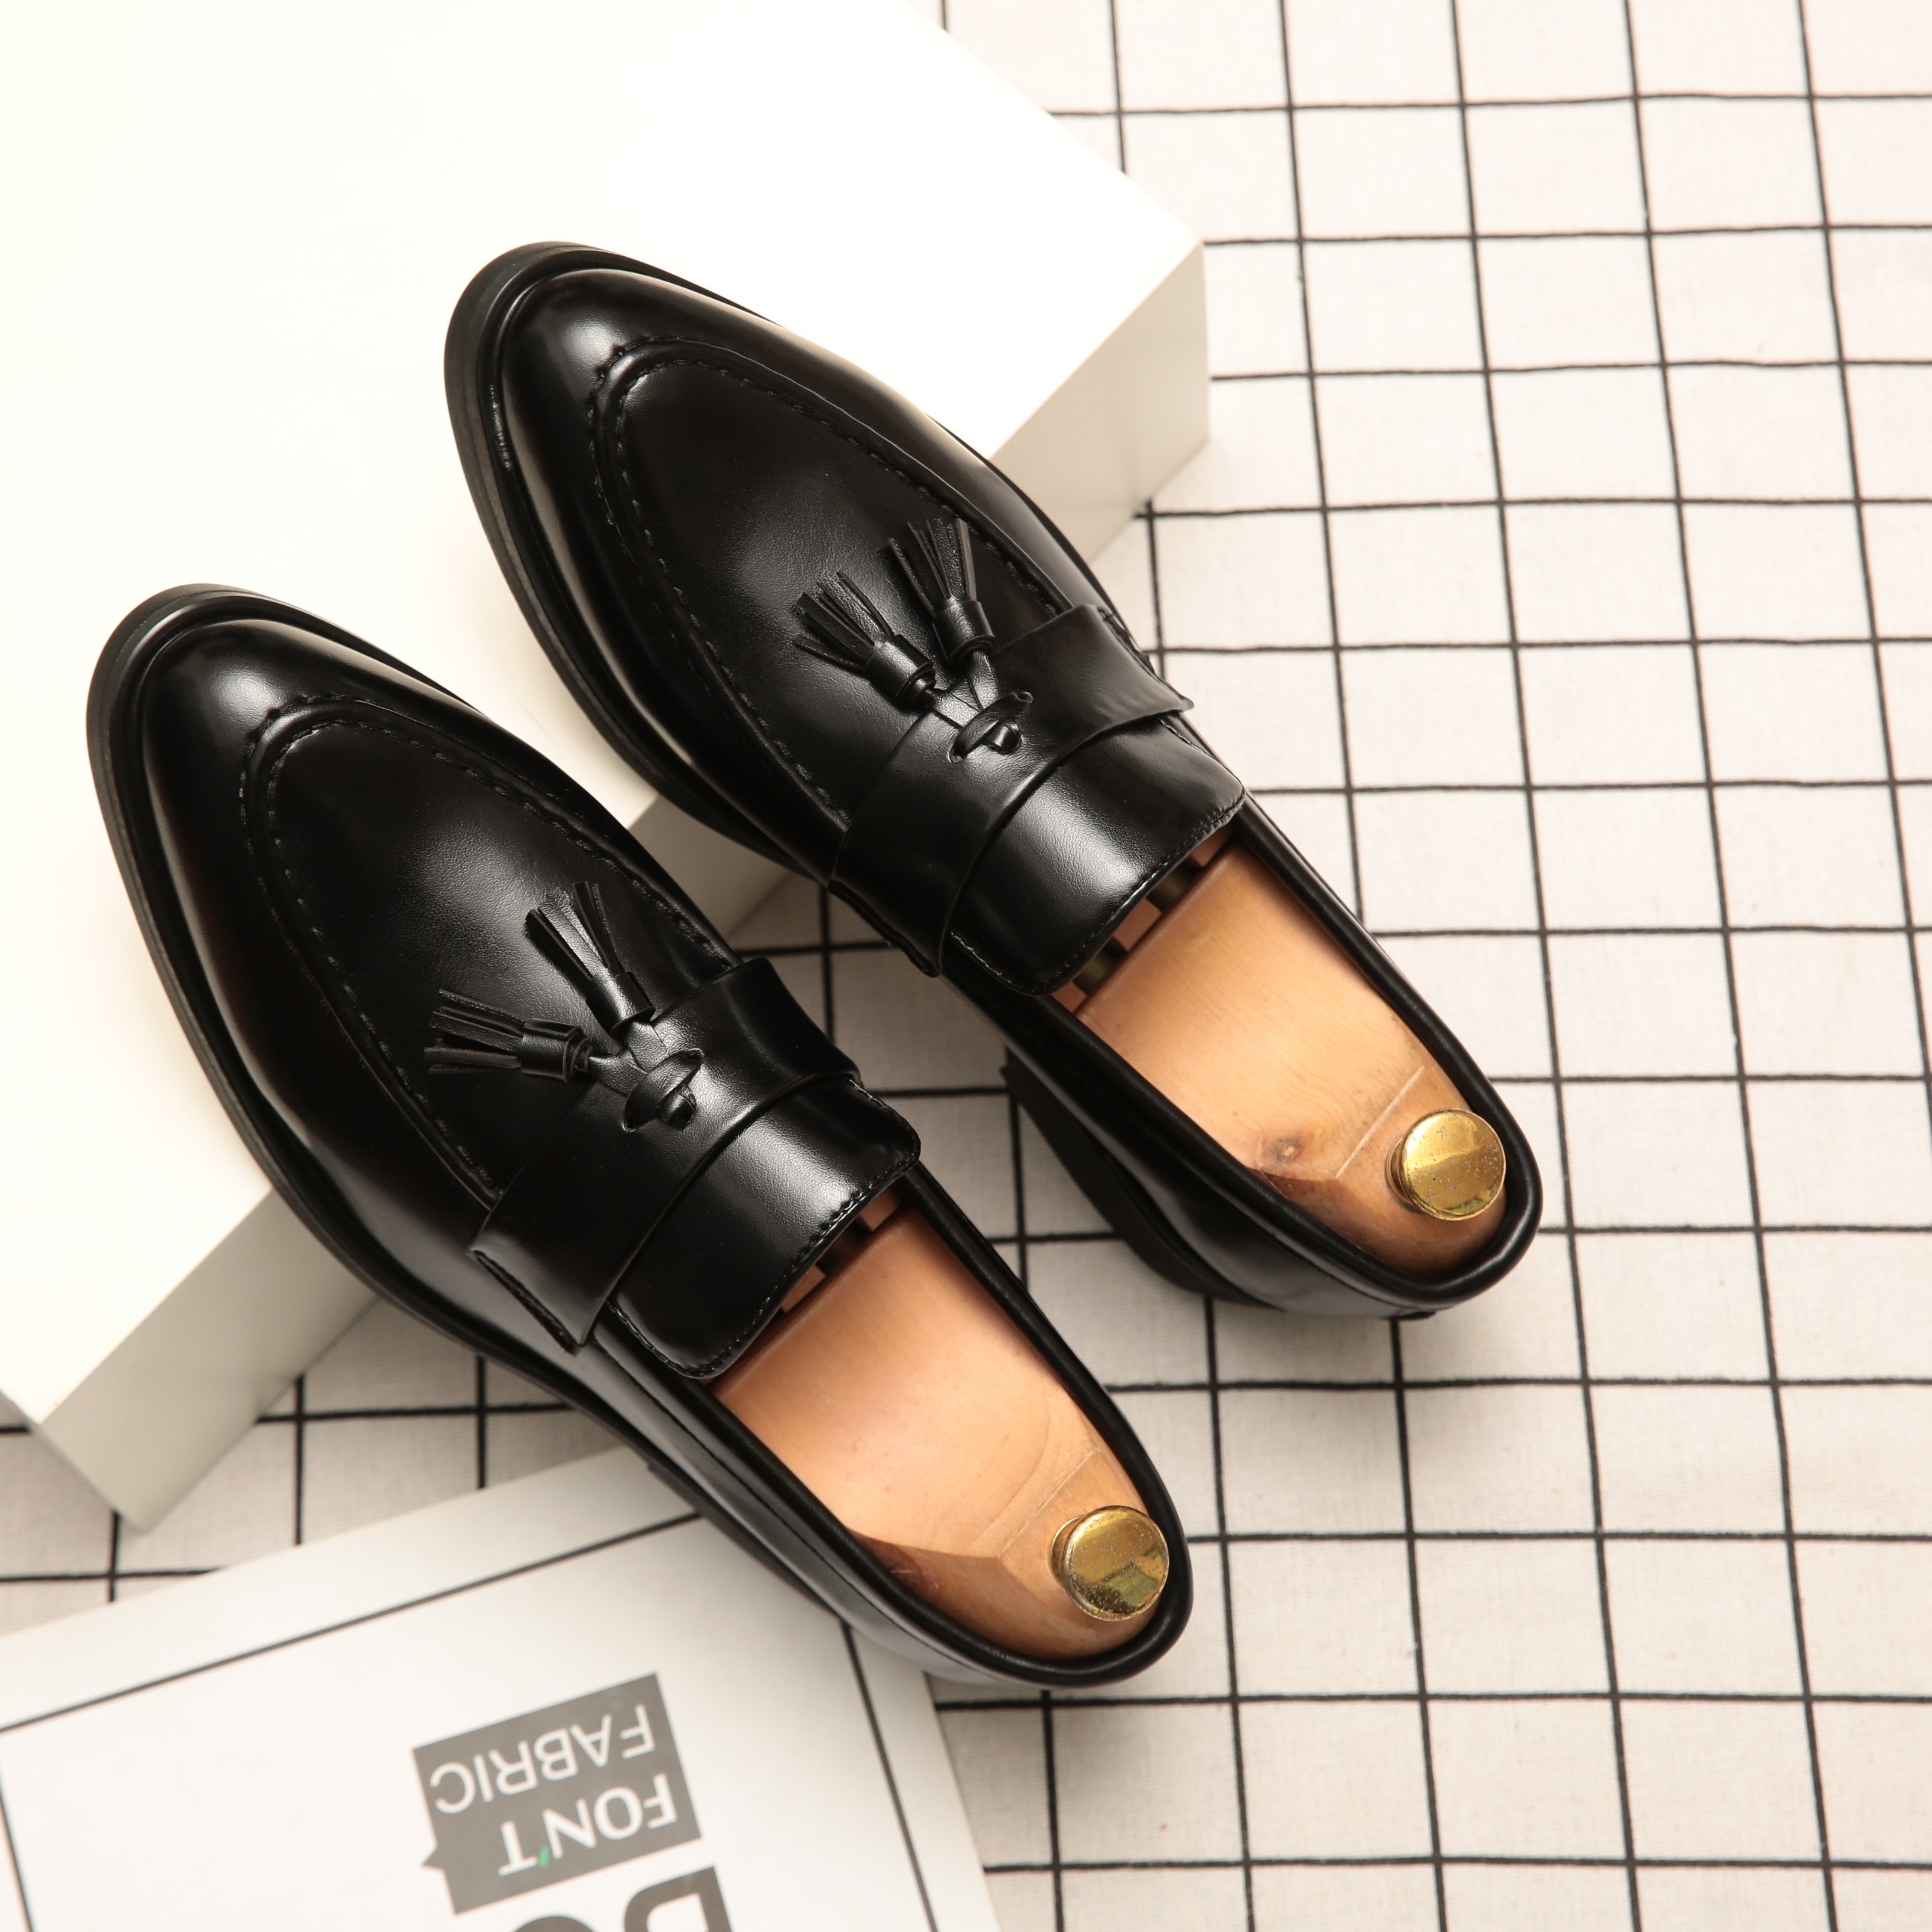 Gold Metallic Patent Leather Tassels Mens Oxfords Loafers Dress